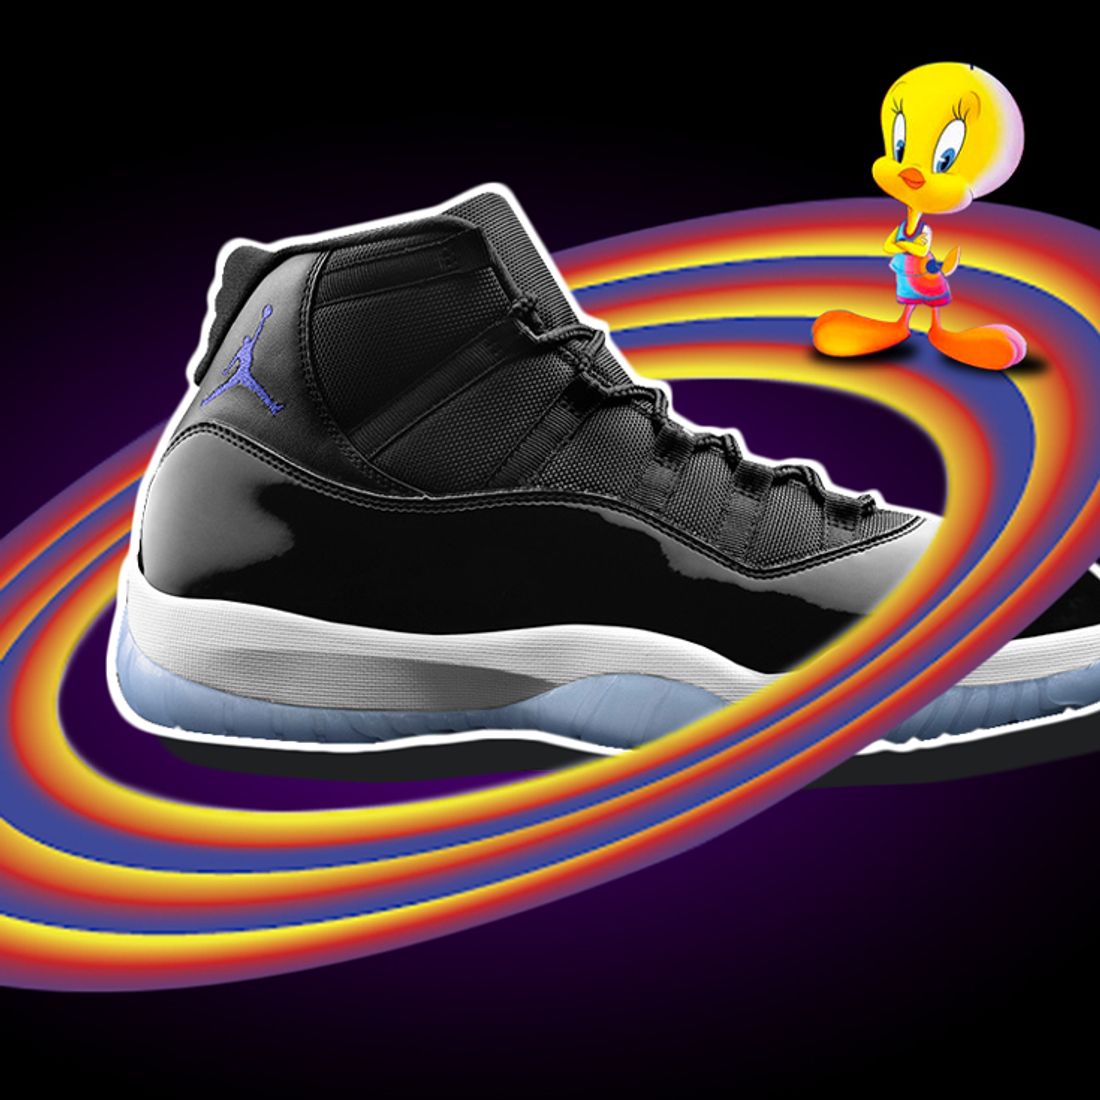 B/R Kicks on X: Welcome to the Space Jam! Which sneaker are you